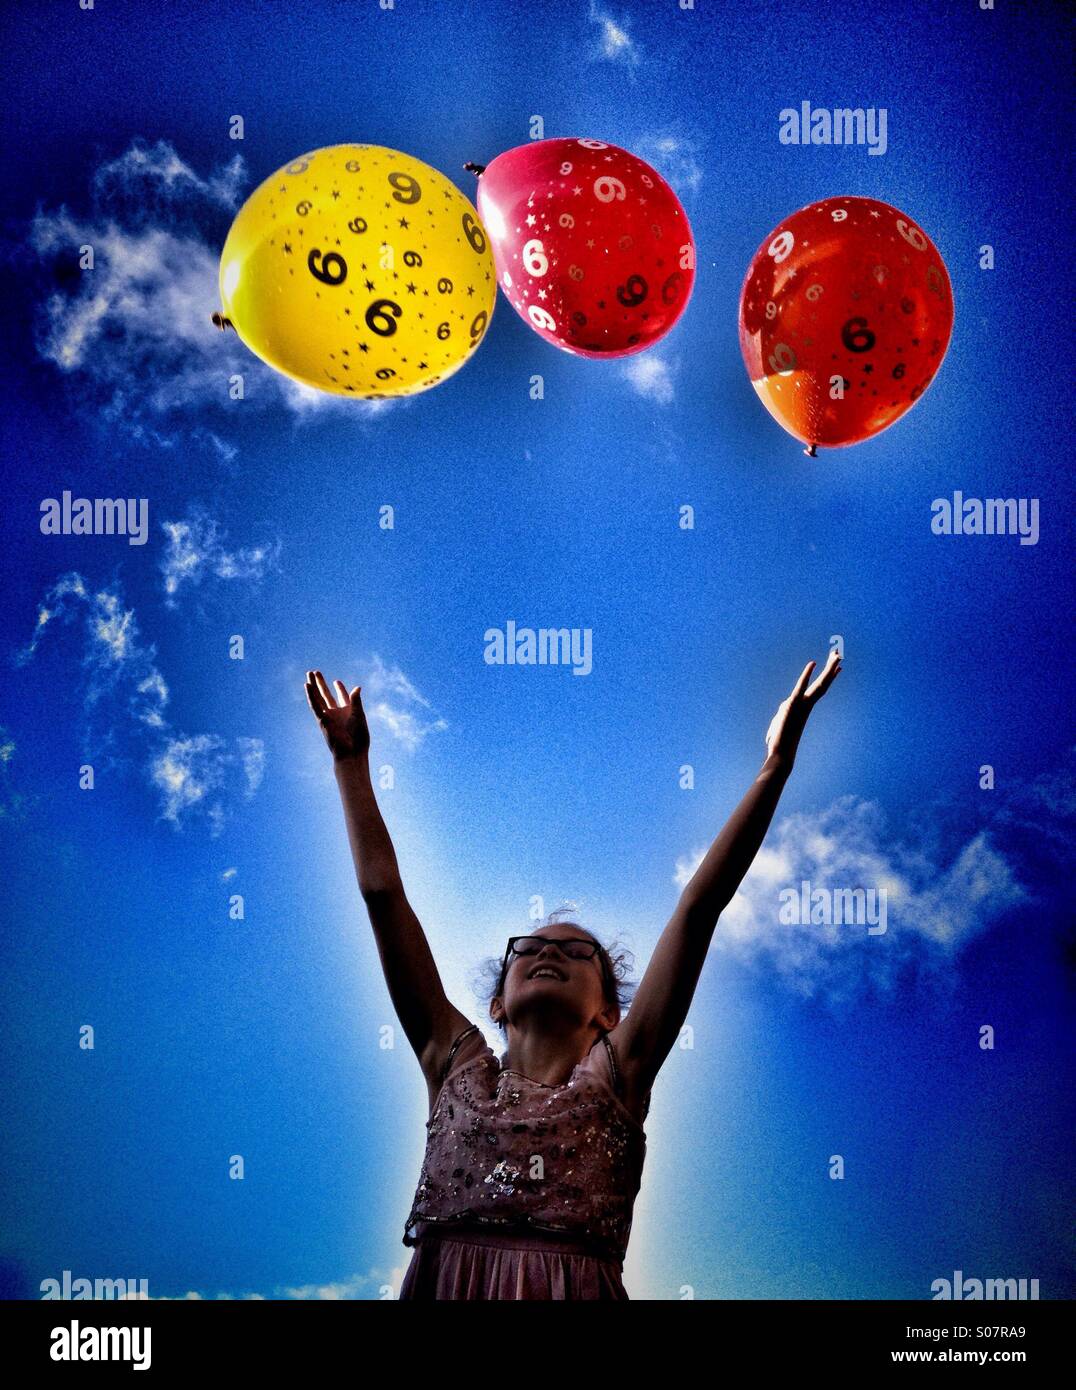 Young girl throwing party balloons in to air Stock Photo